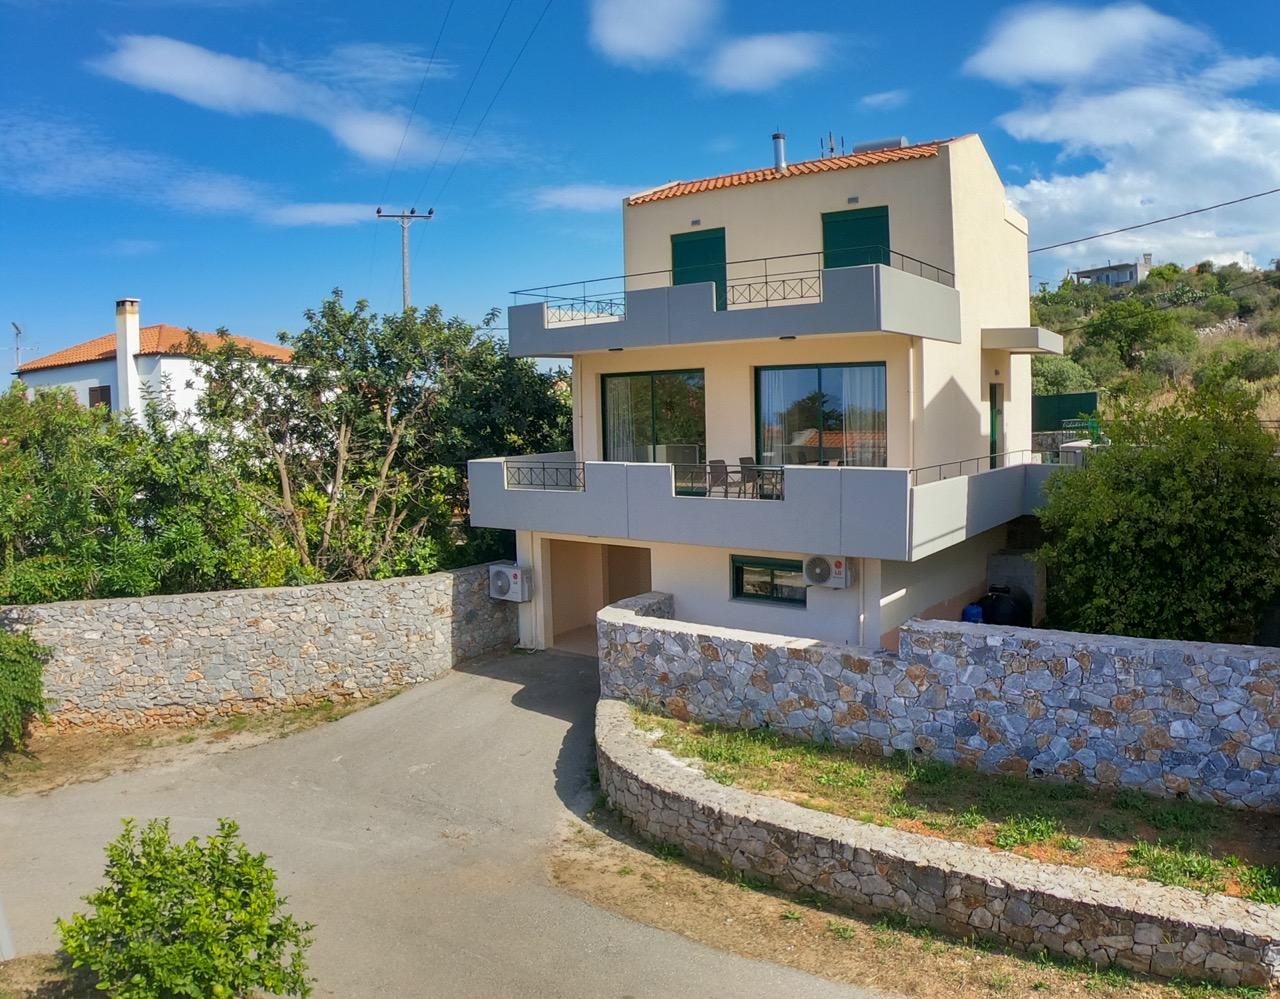 Complex With 4 Villas for Sale in Chania, Greece